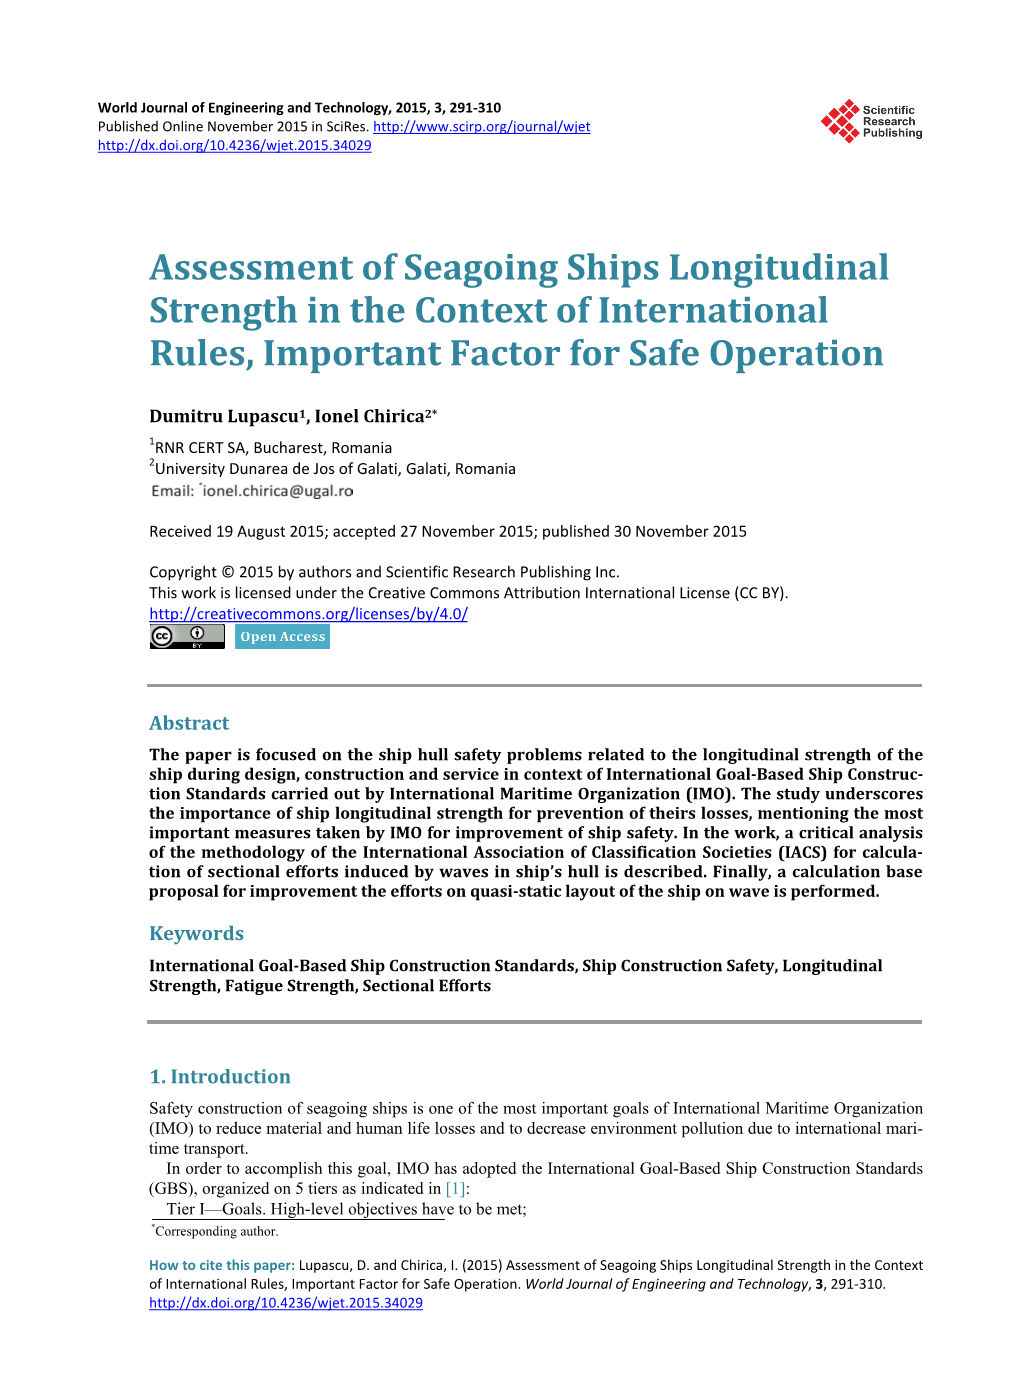 Assessment of Seagoing Ships Longitudinal Strength in the Context of International Rules, Important Factor for Safe Operation